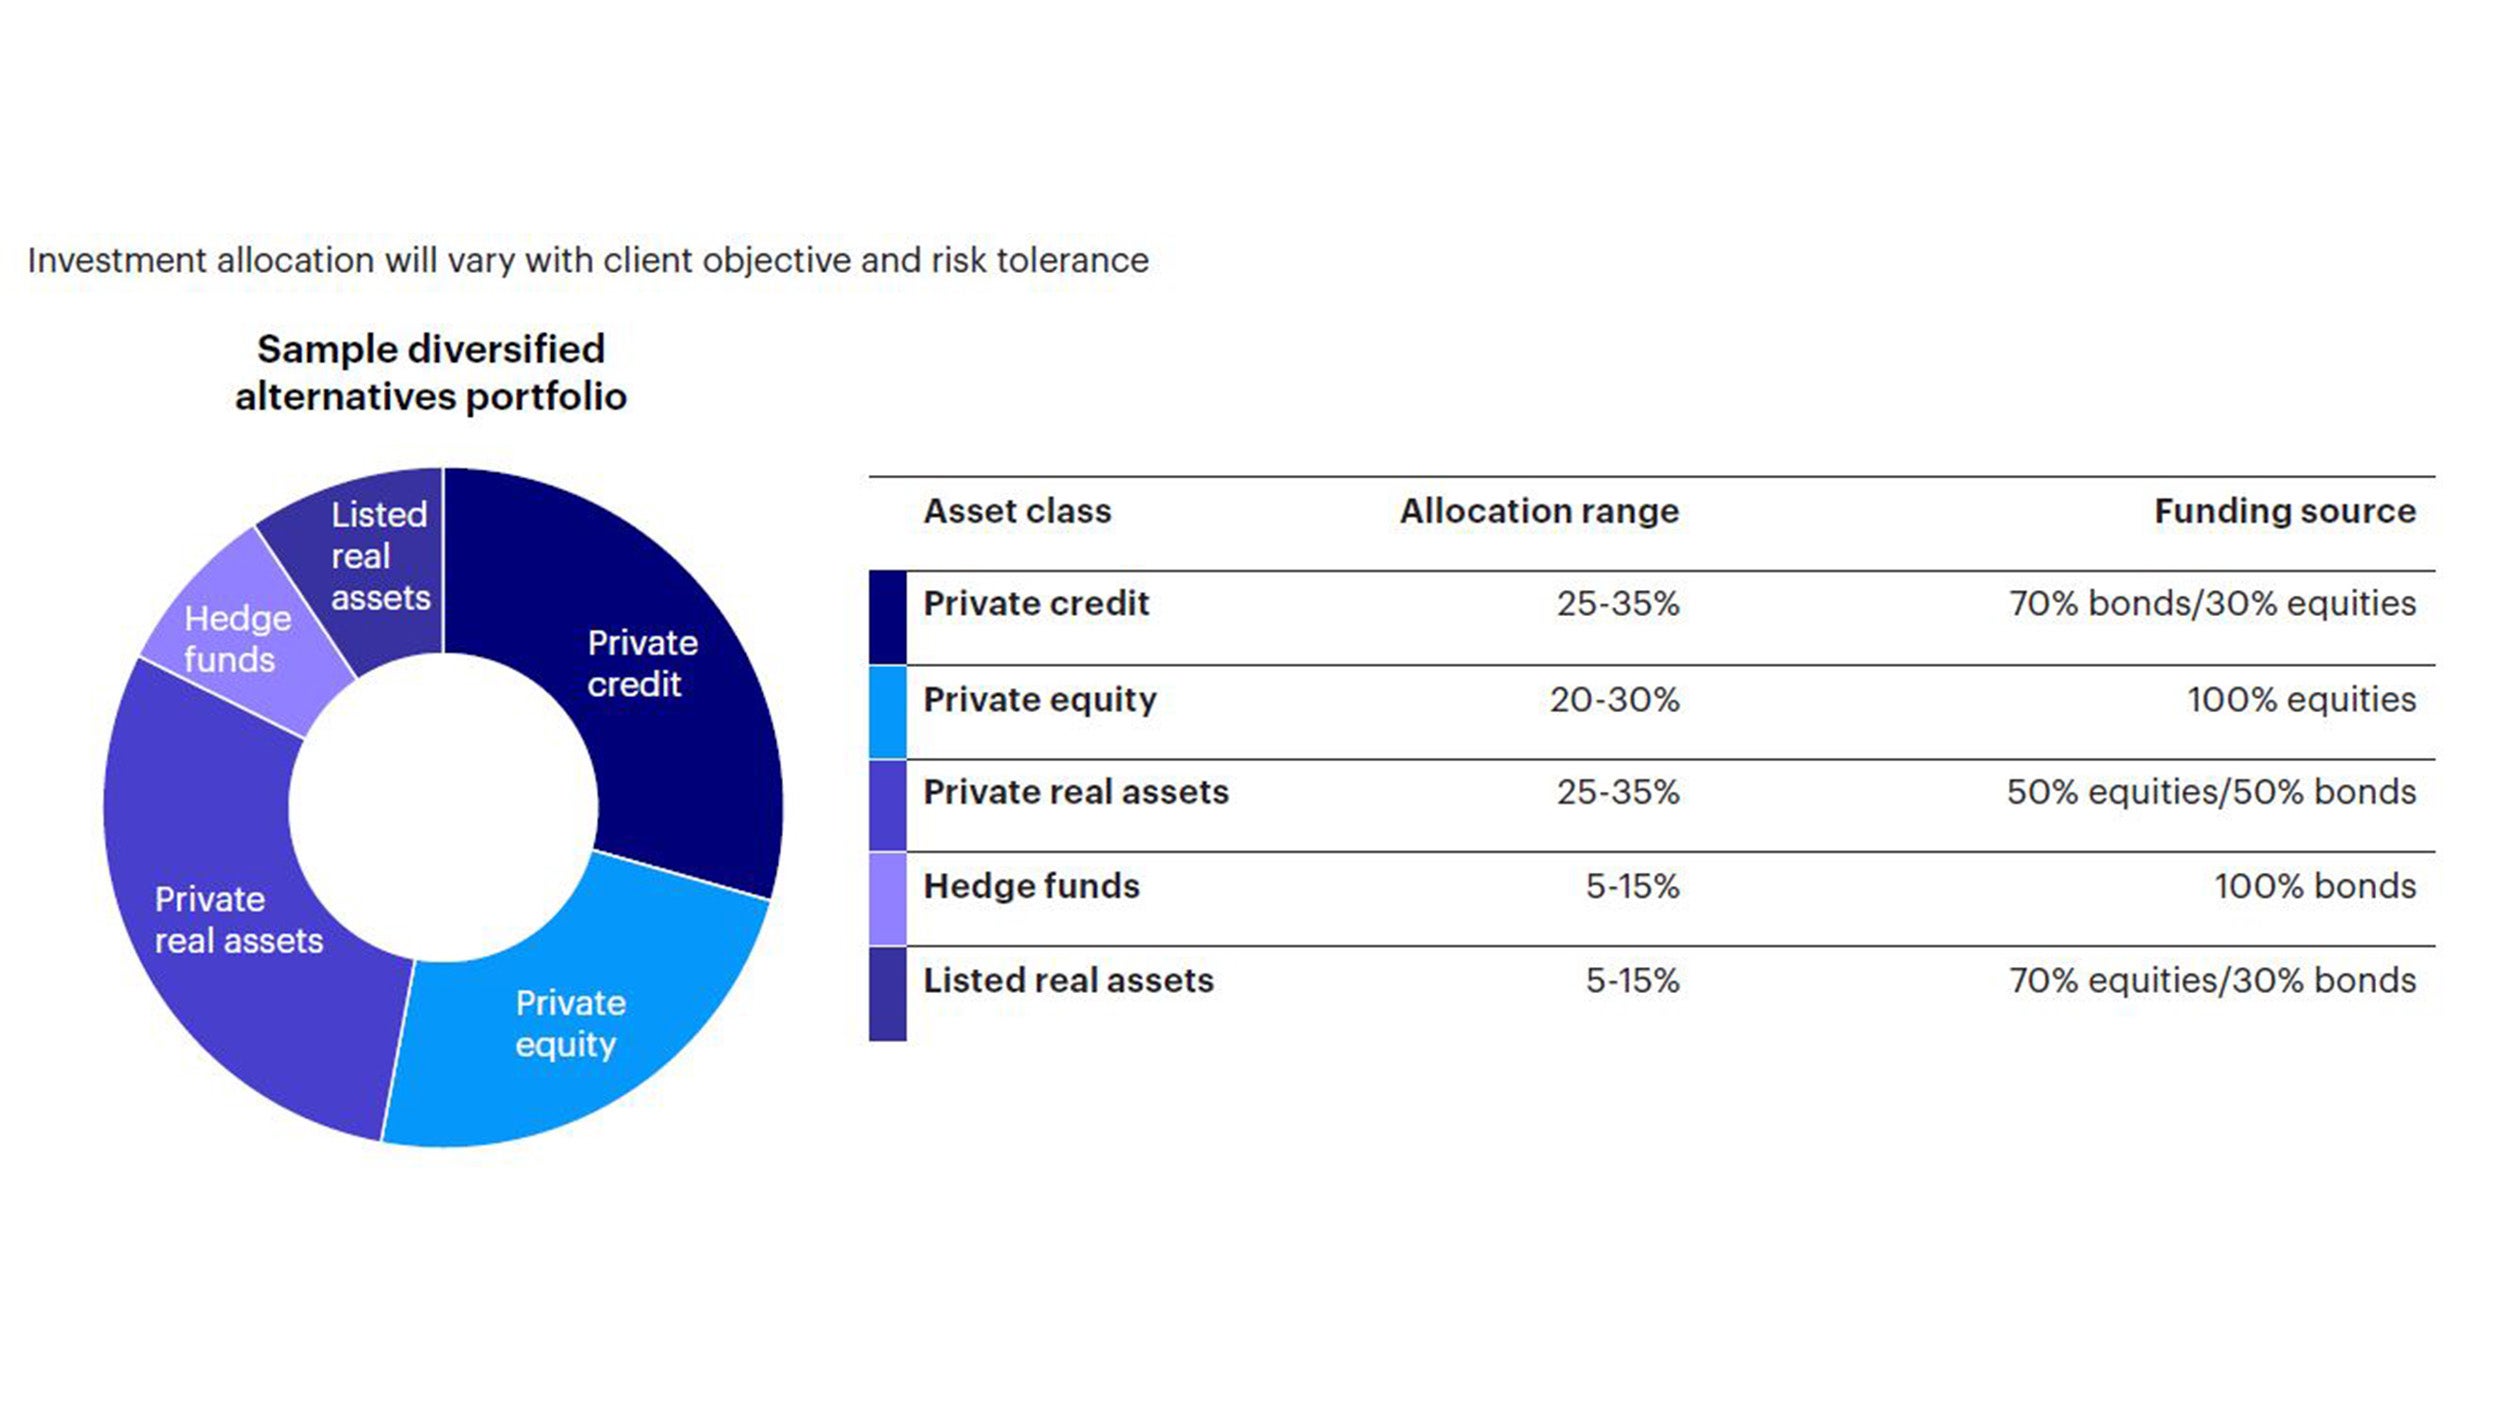 Figure 3: Potential alternative asset allocation range and funding source